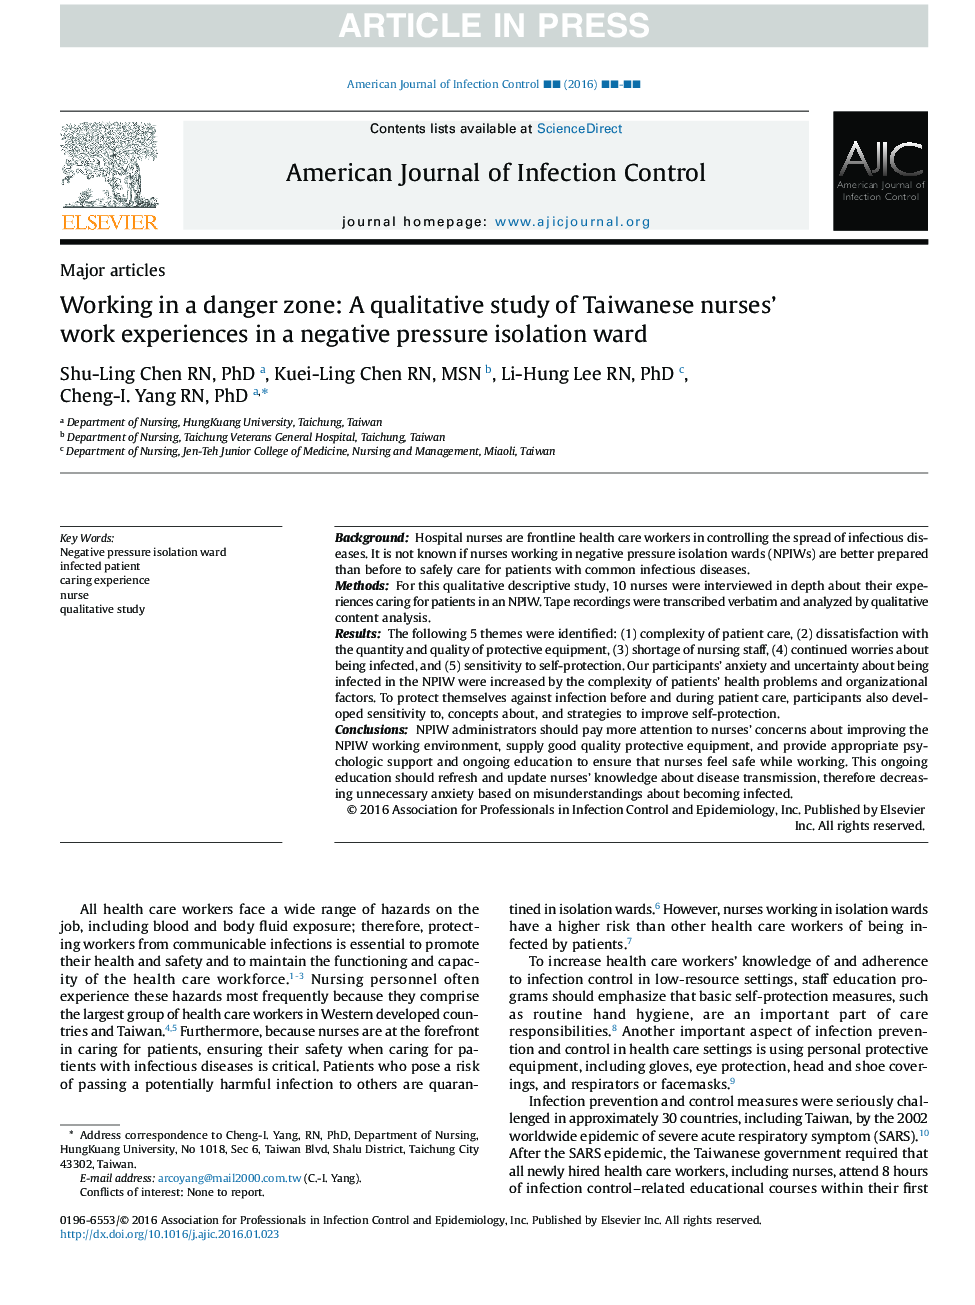 Working in a danger zone: A qualitative study of Taiwanese nurses' work experiences in a negative pressure isolation ward